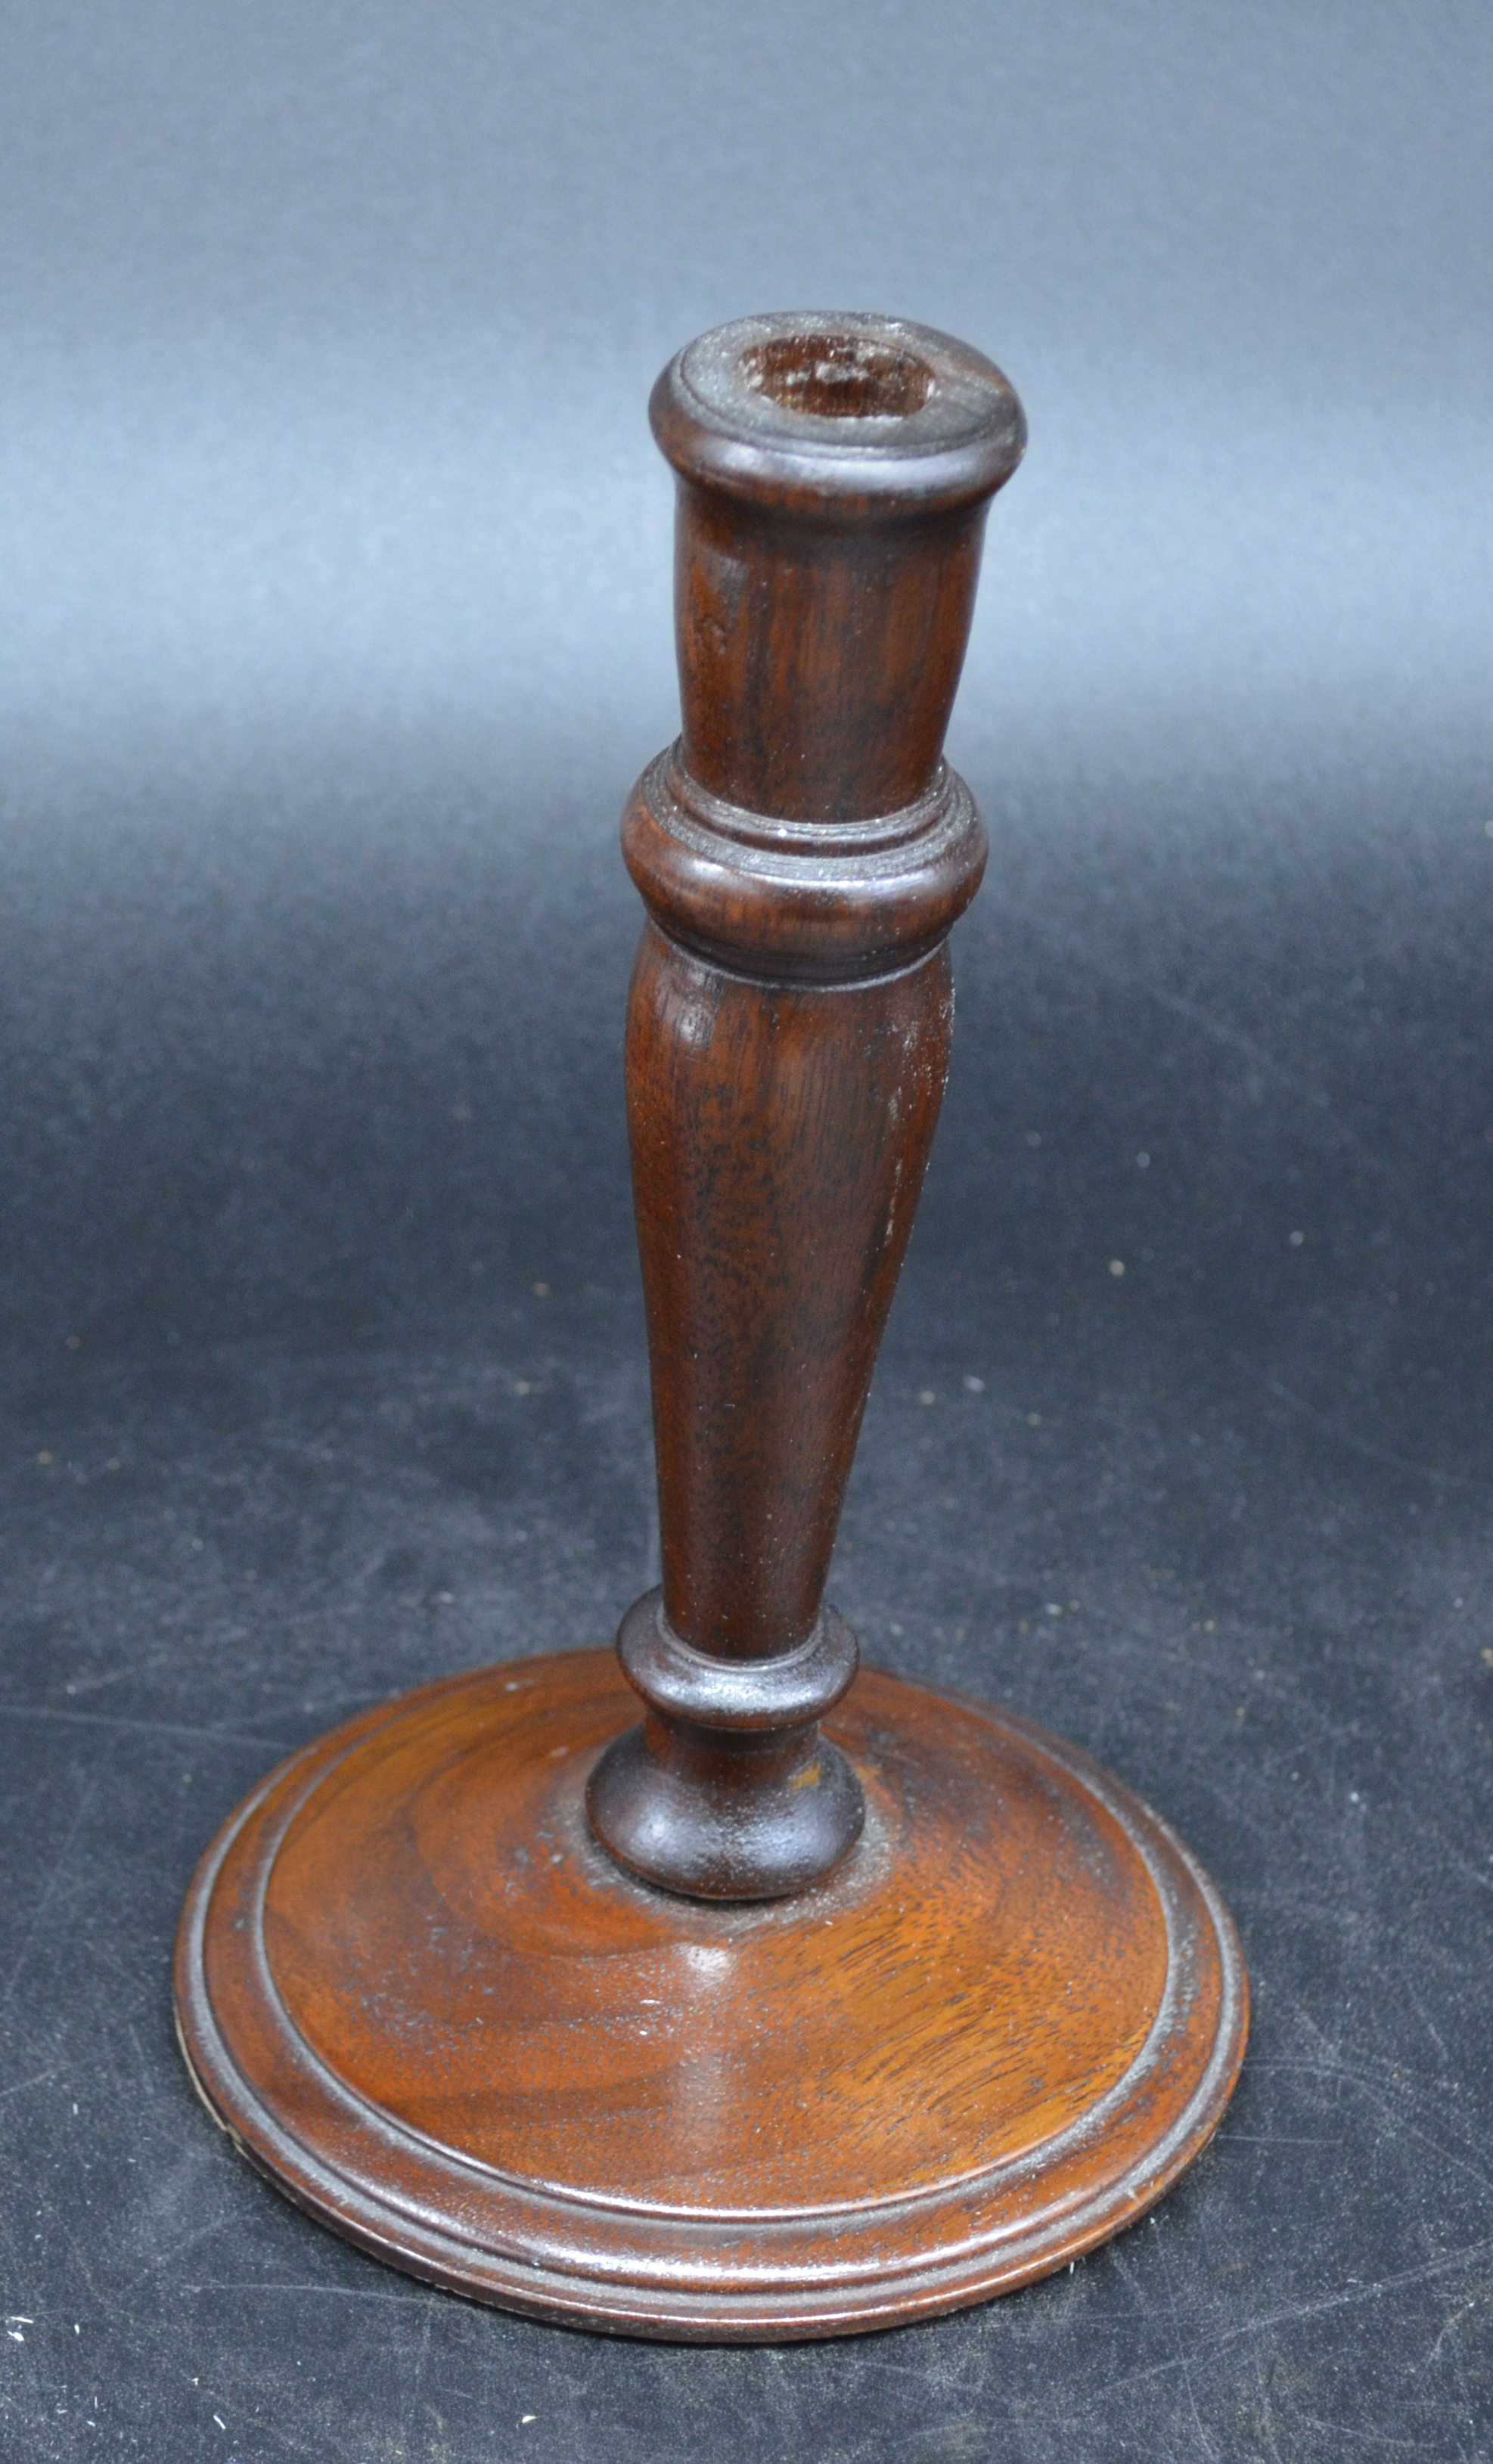 colour%20photo%20showing%20a%20wooden%20candlestick